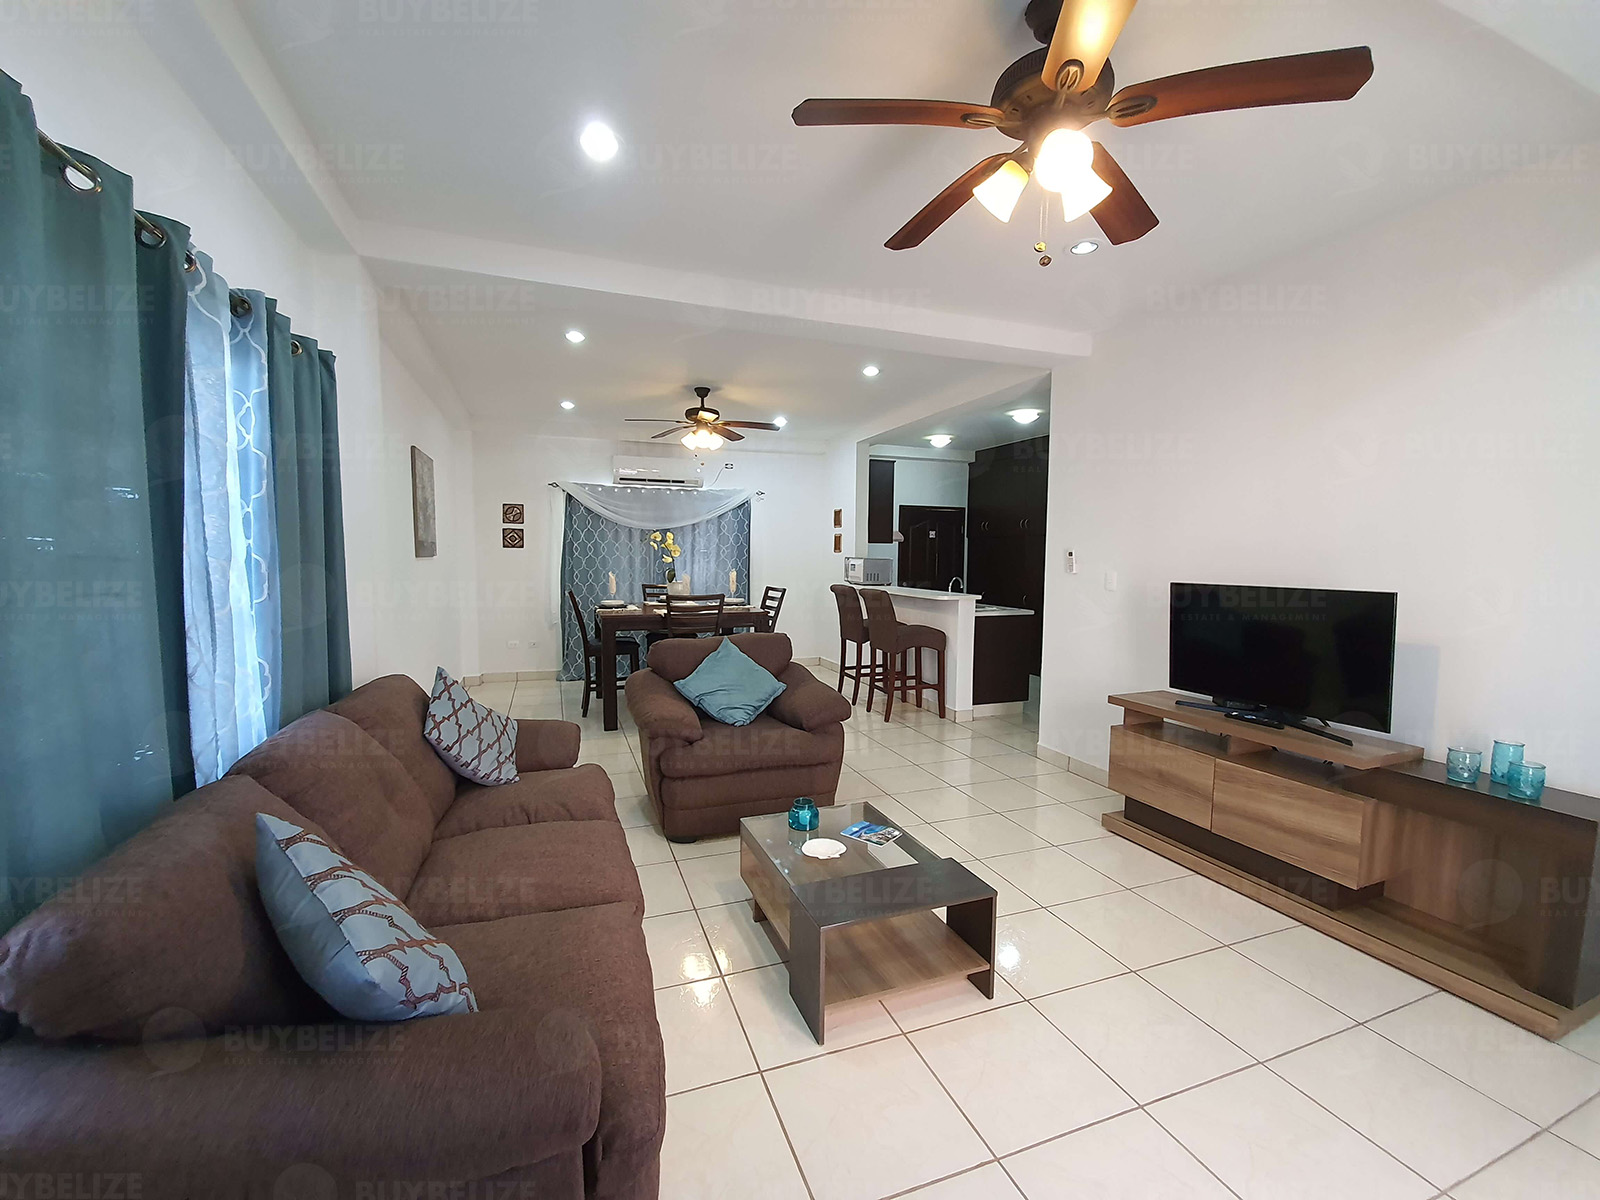 Furnished Apartment for Rent in Belize City